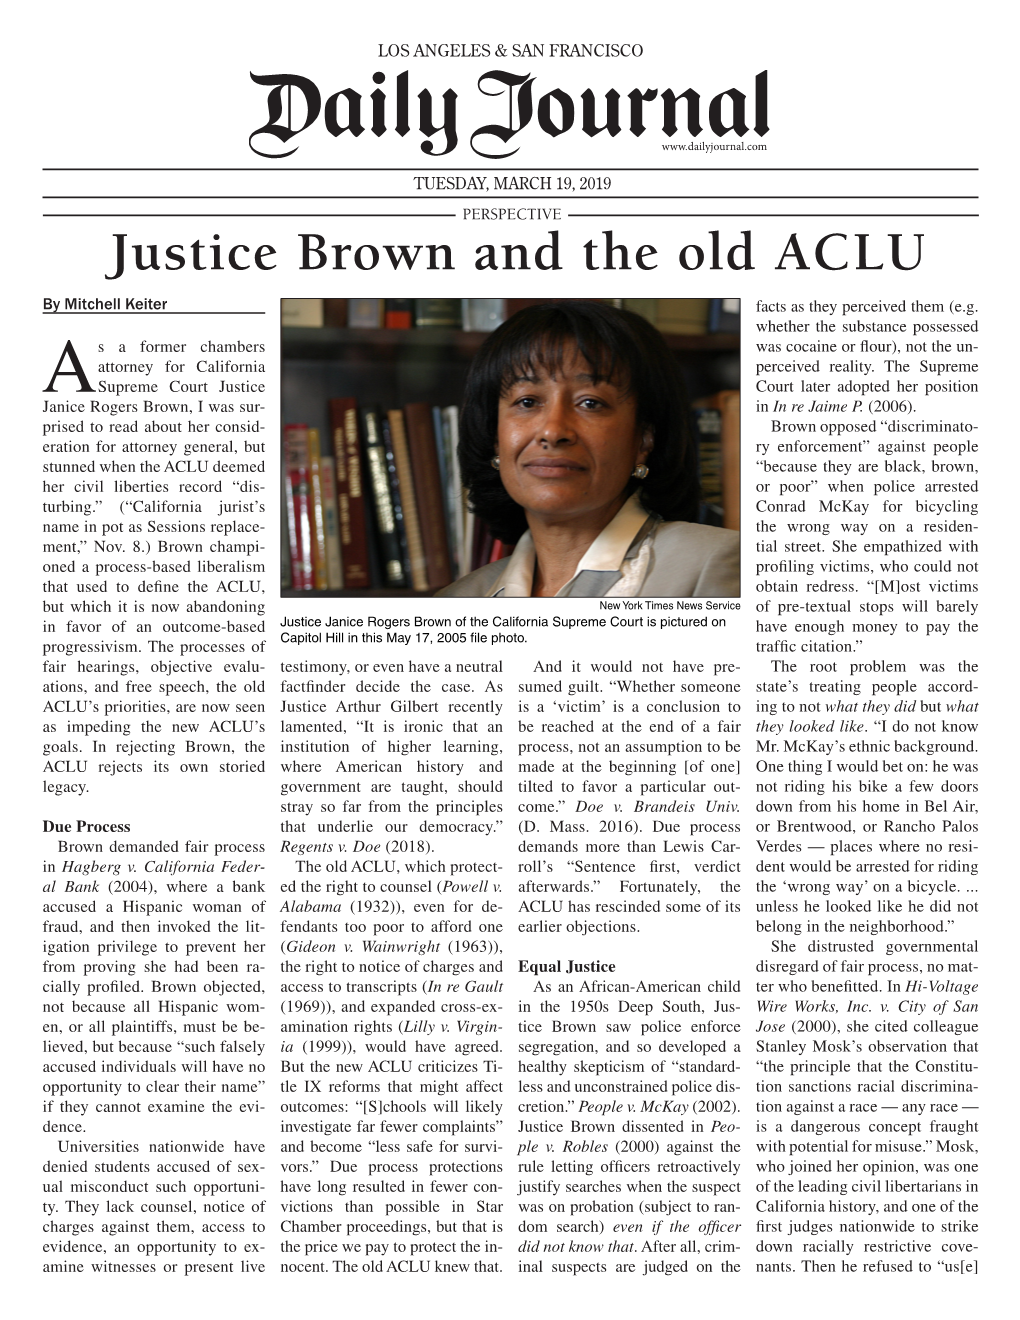 Justice Brown and the Old ACLU by Mitchell Keiter Facts As They Perceived Them (E.G